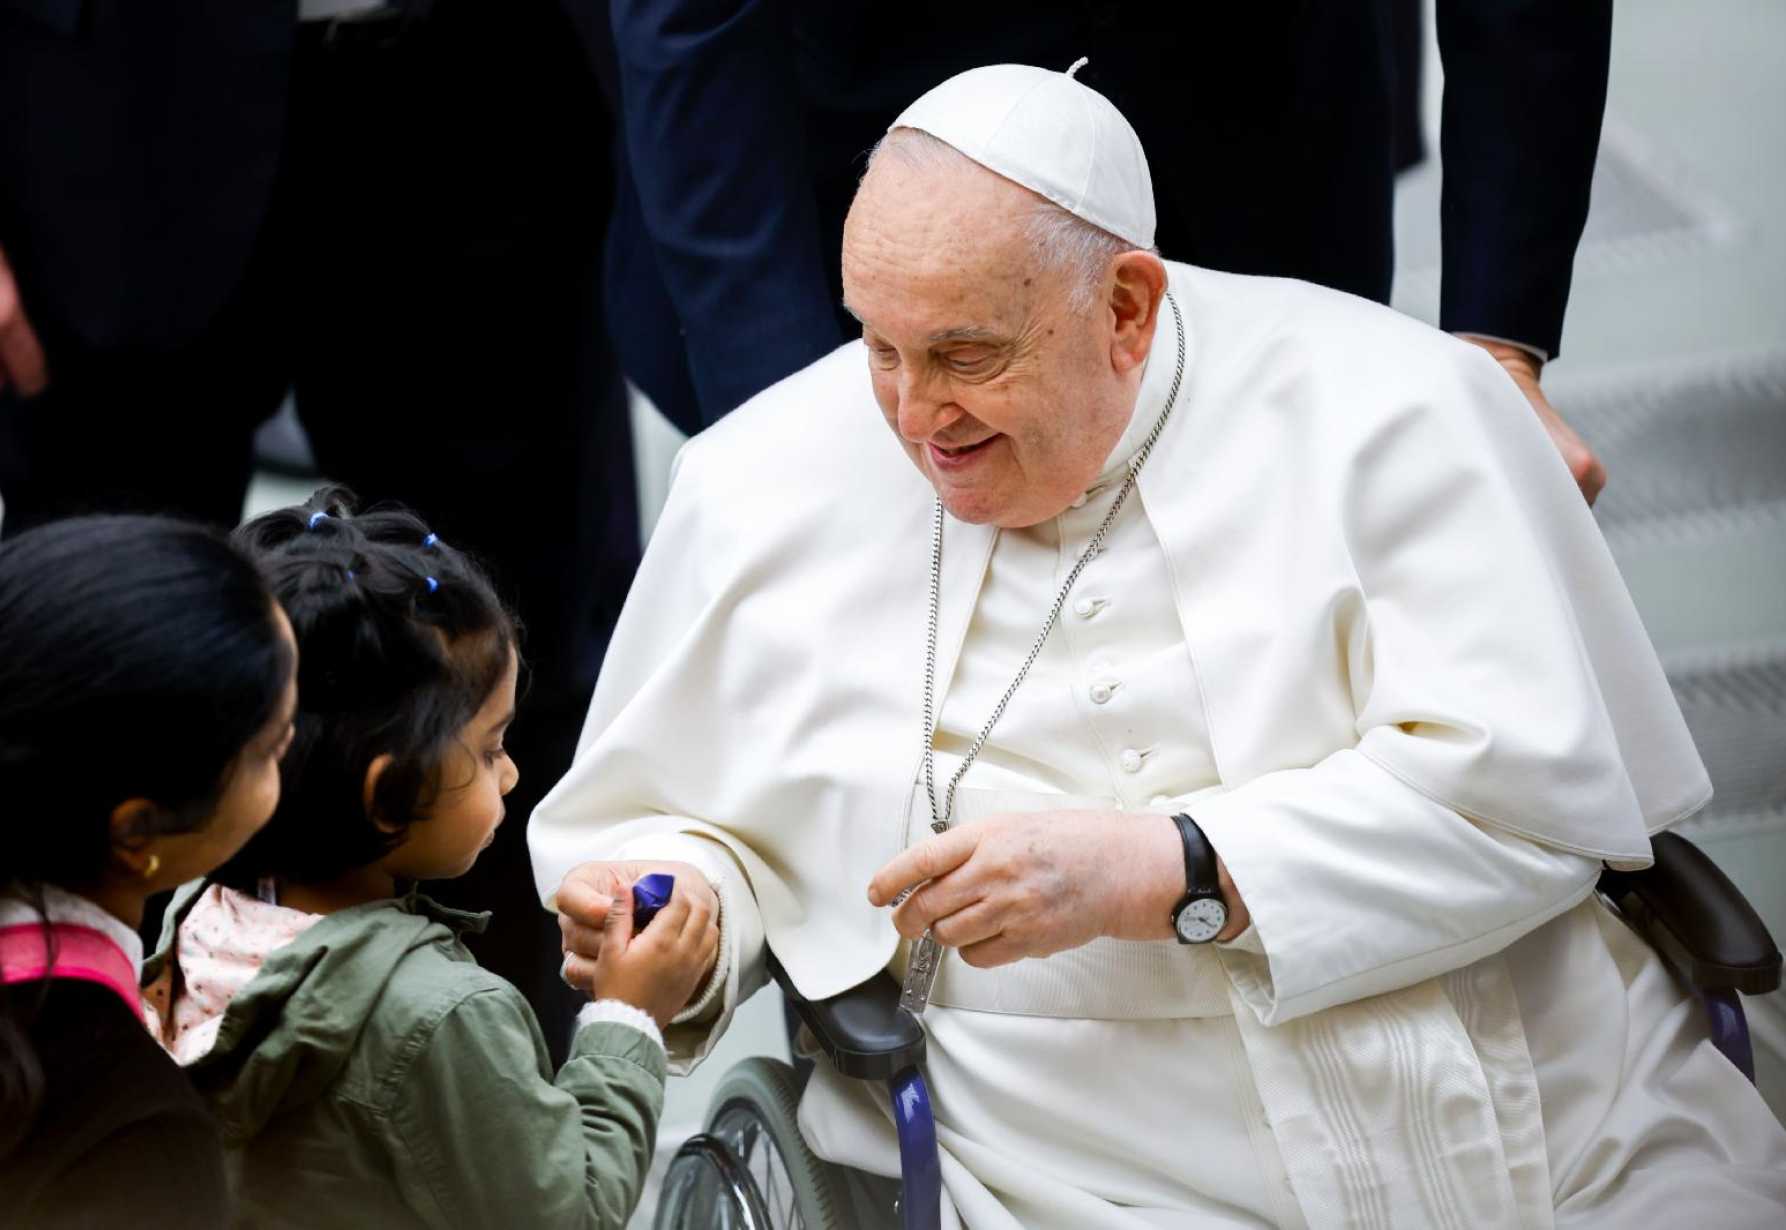 Be generous with others; greed is a sickness, pope says at